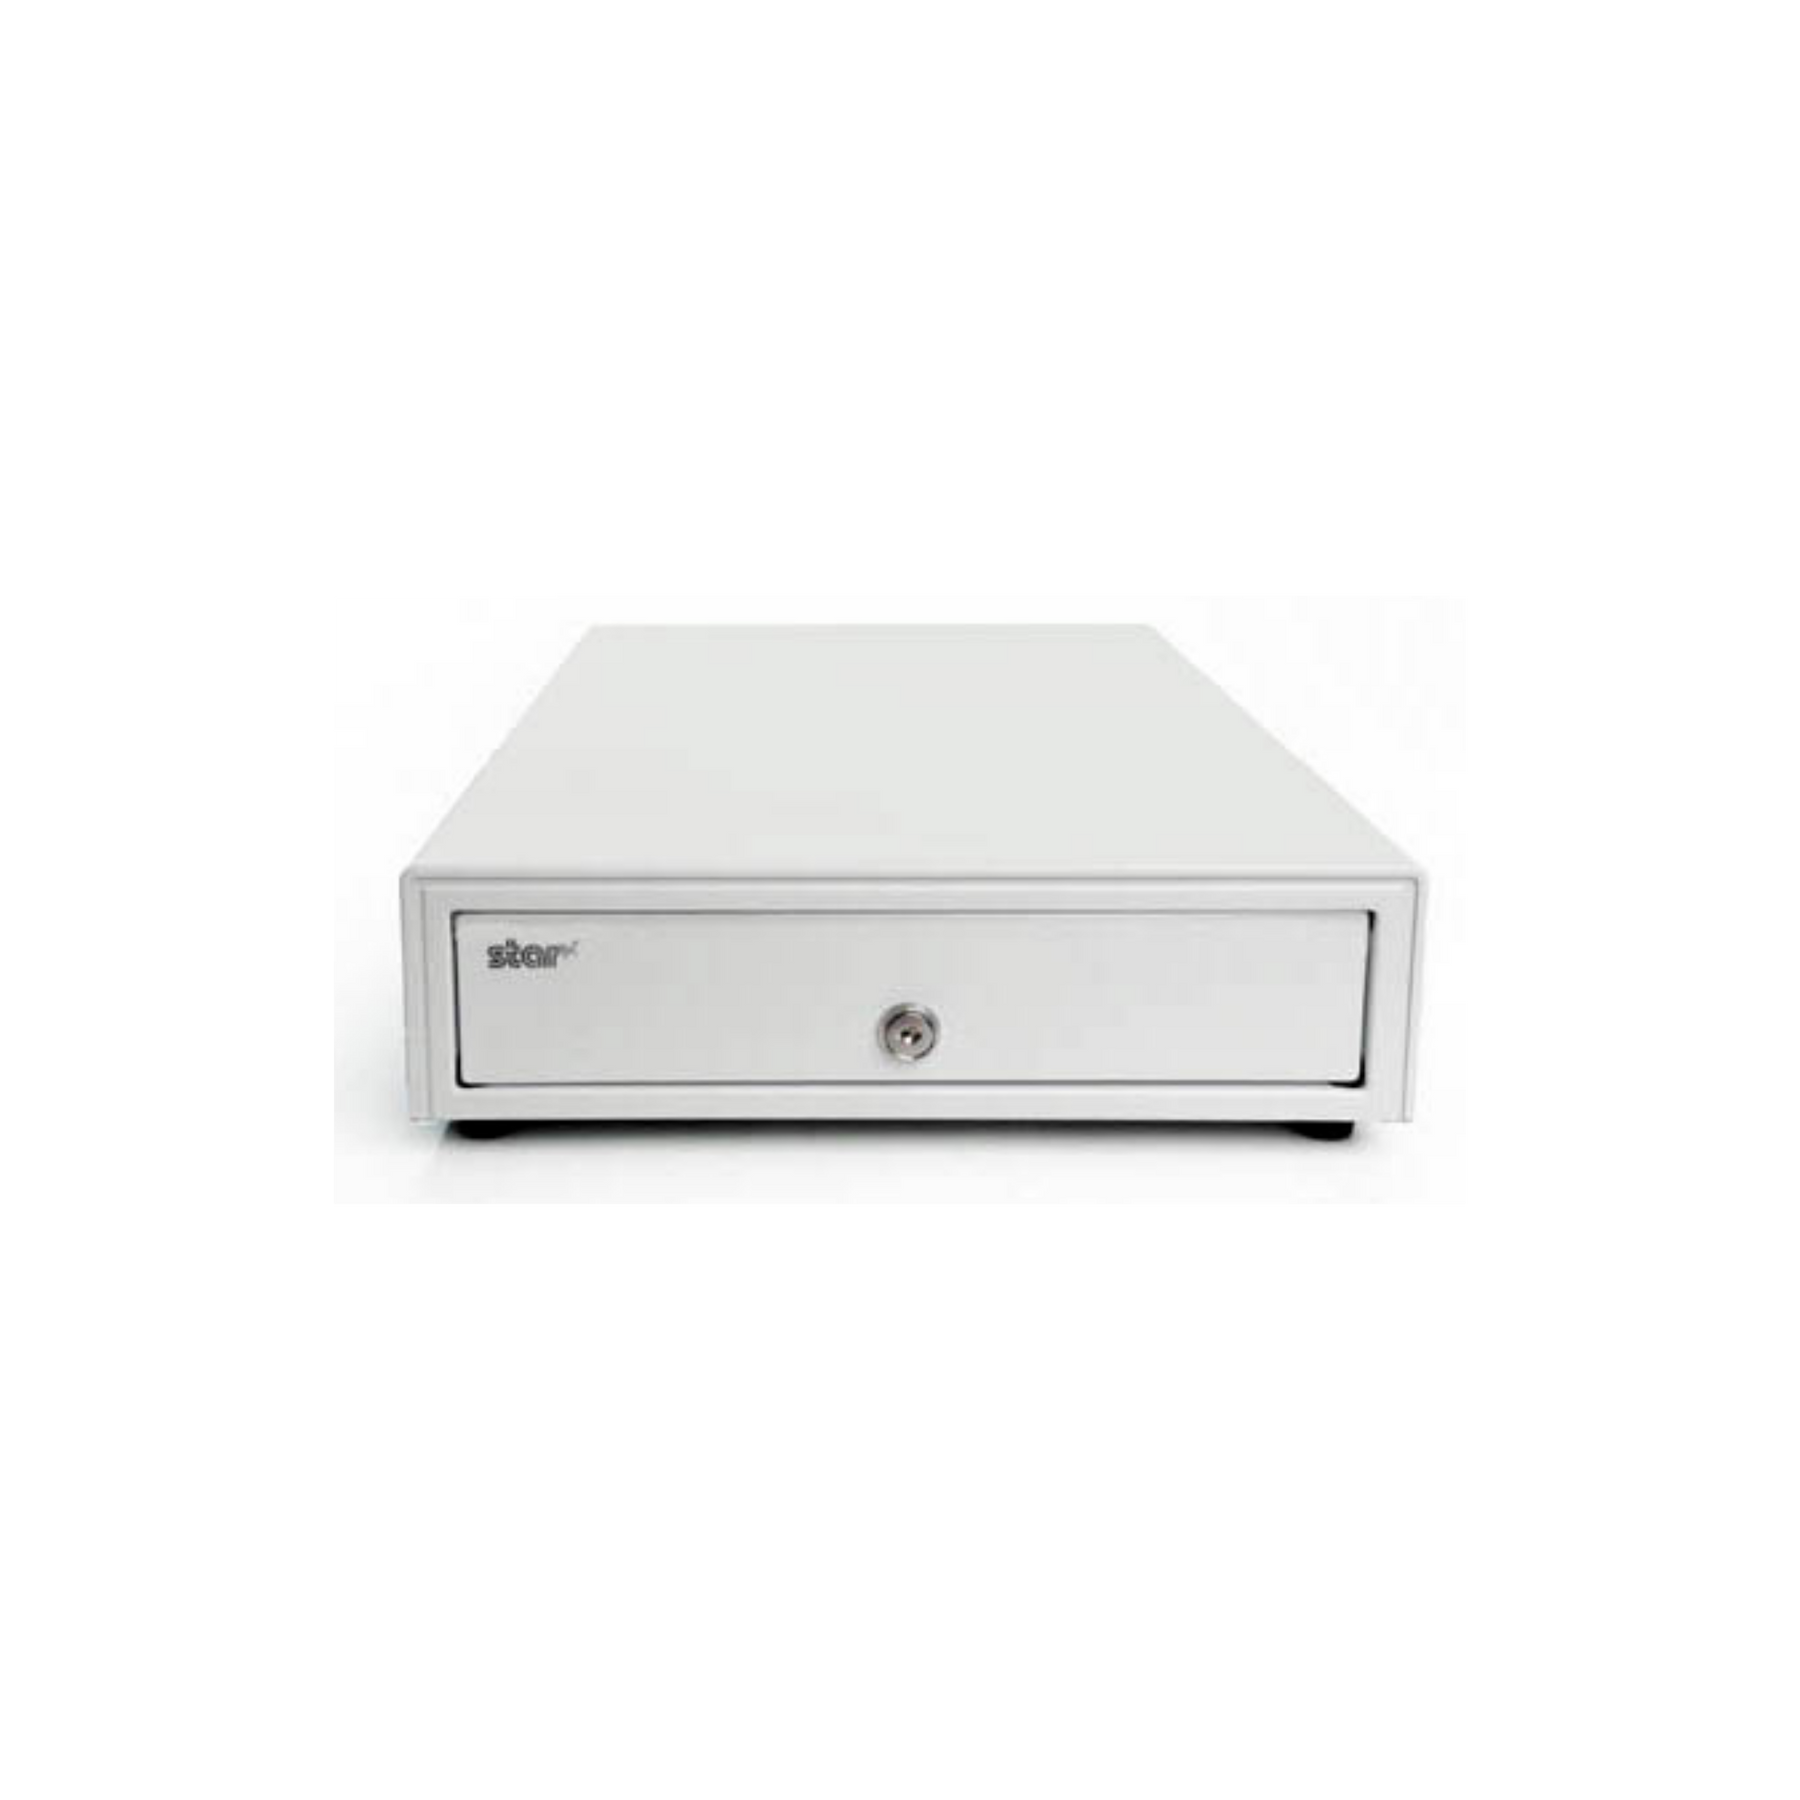 Star Micronics, Max Cash Drawers - SMD2, Colors: Black, White